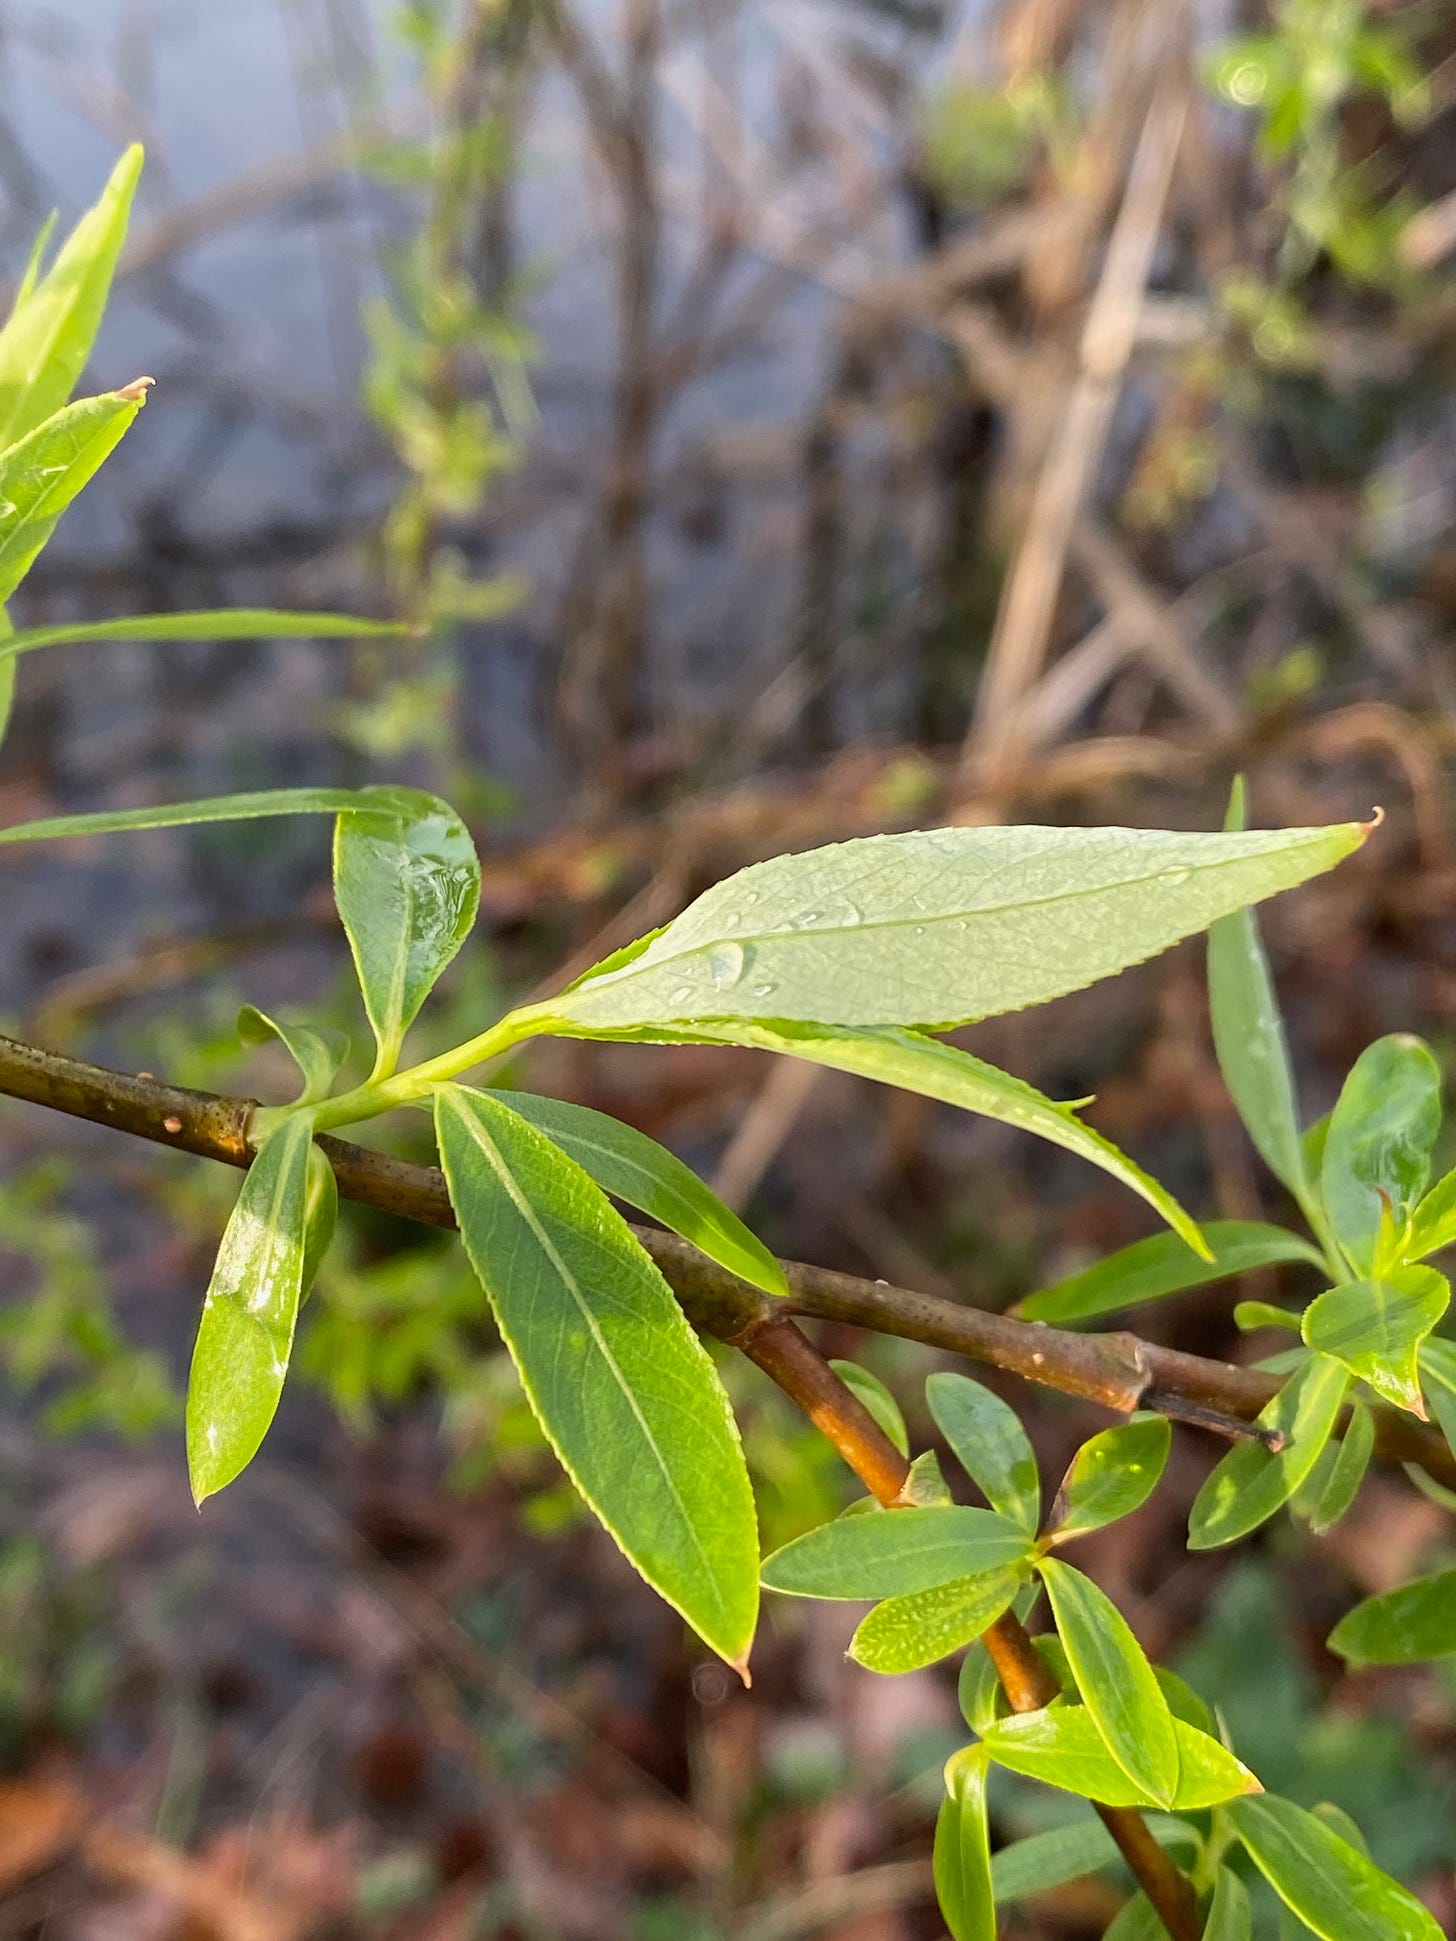 Water beads up on the silky underside of the young willow leaf  (center). 